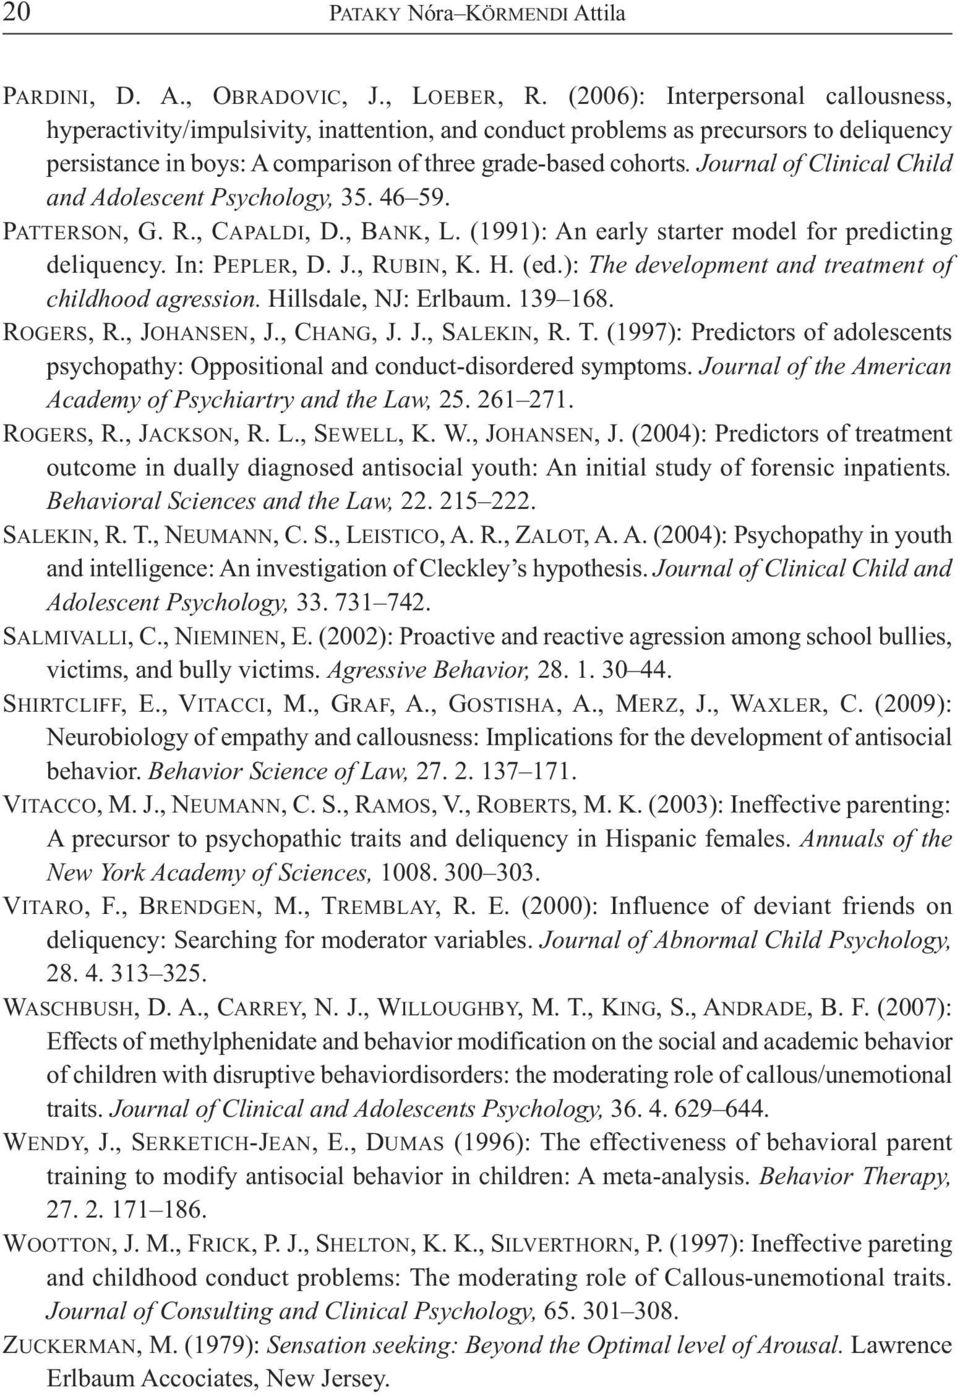 Jo ur nal of Clinical Child and Adolescent Psychology, 35. 46 59. PATTERSON, G. R., CAPALDI, D., BANK, L. (1991): An early star ter model for predicting deliquency. In: PEPLER, D. J., RU BIN, K. H.